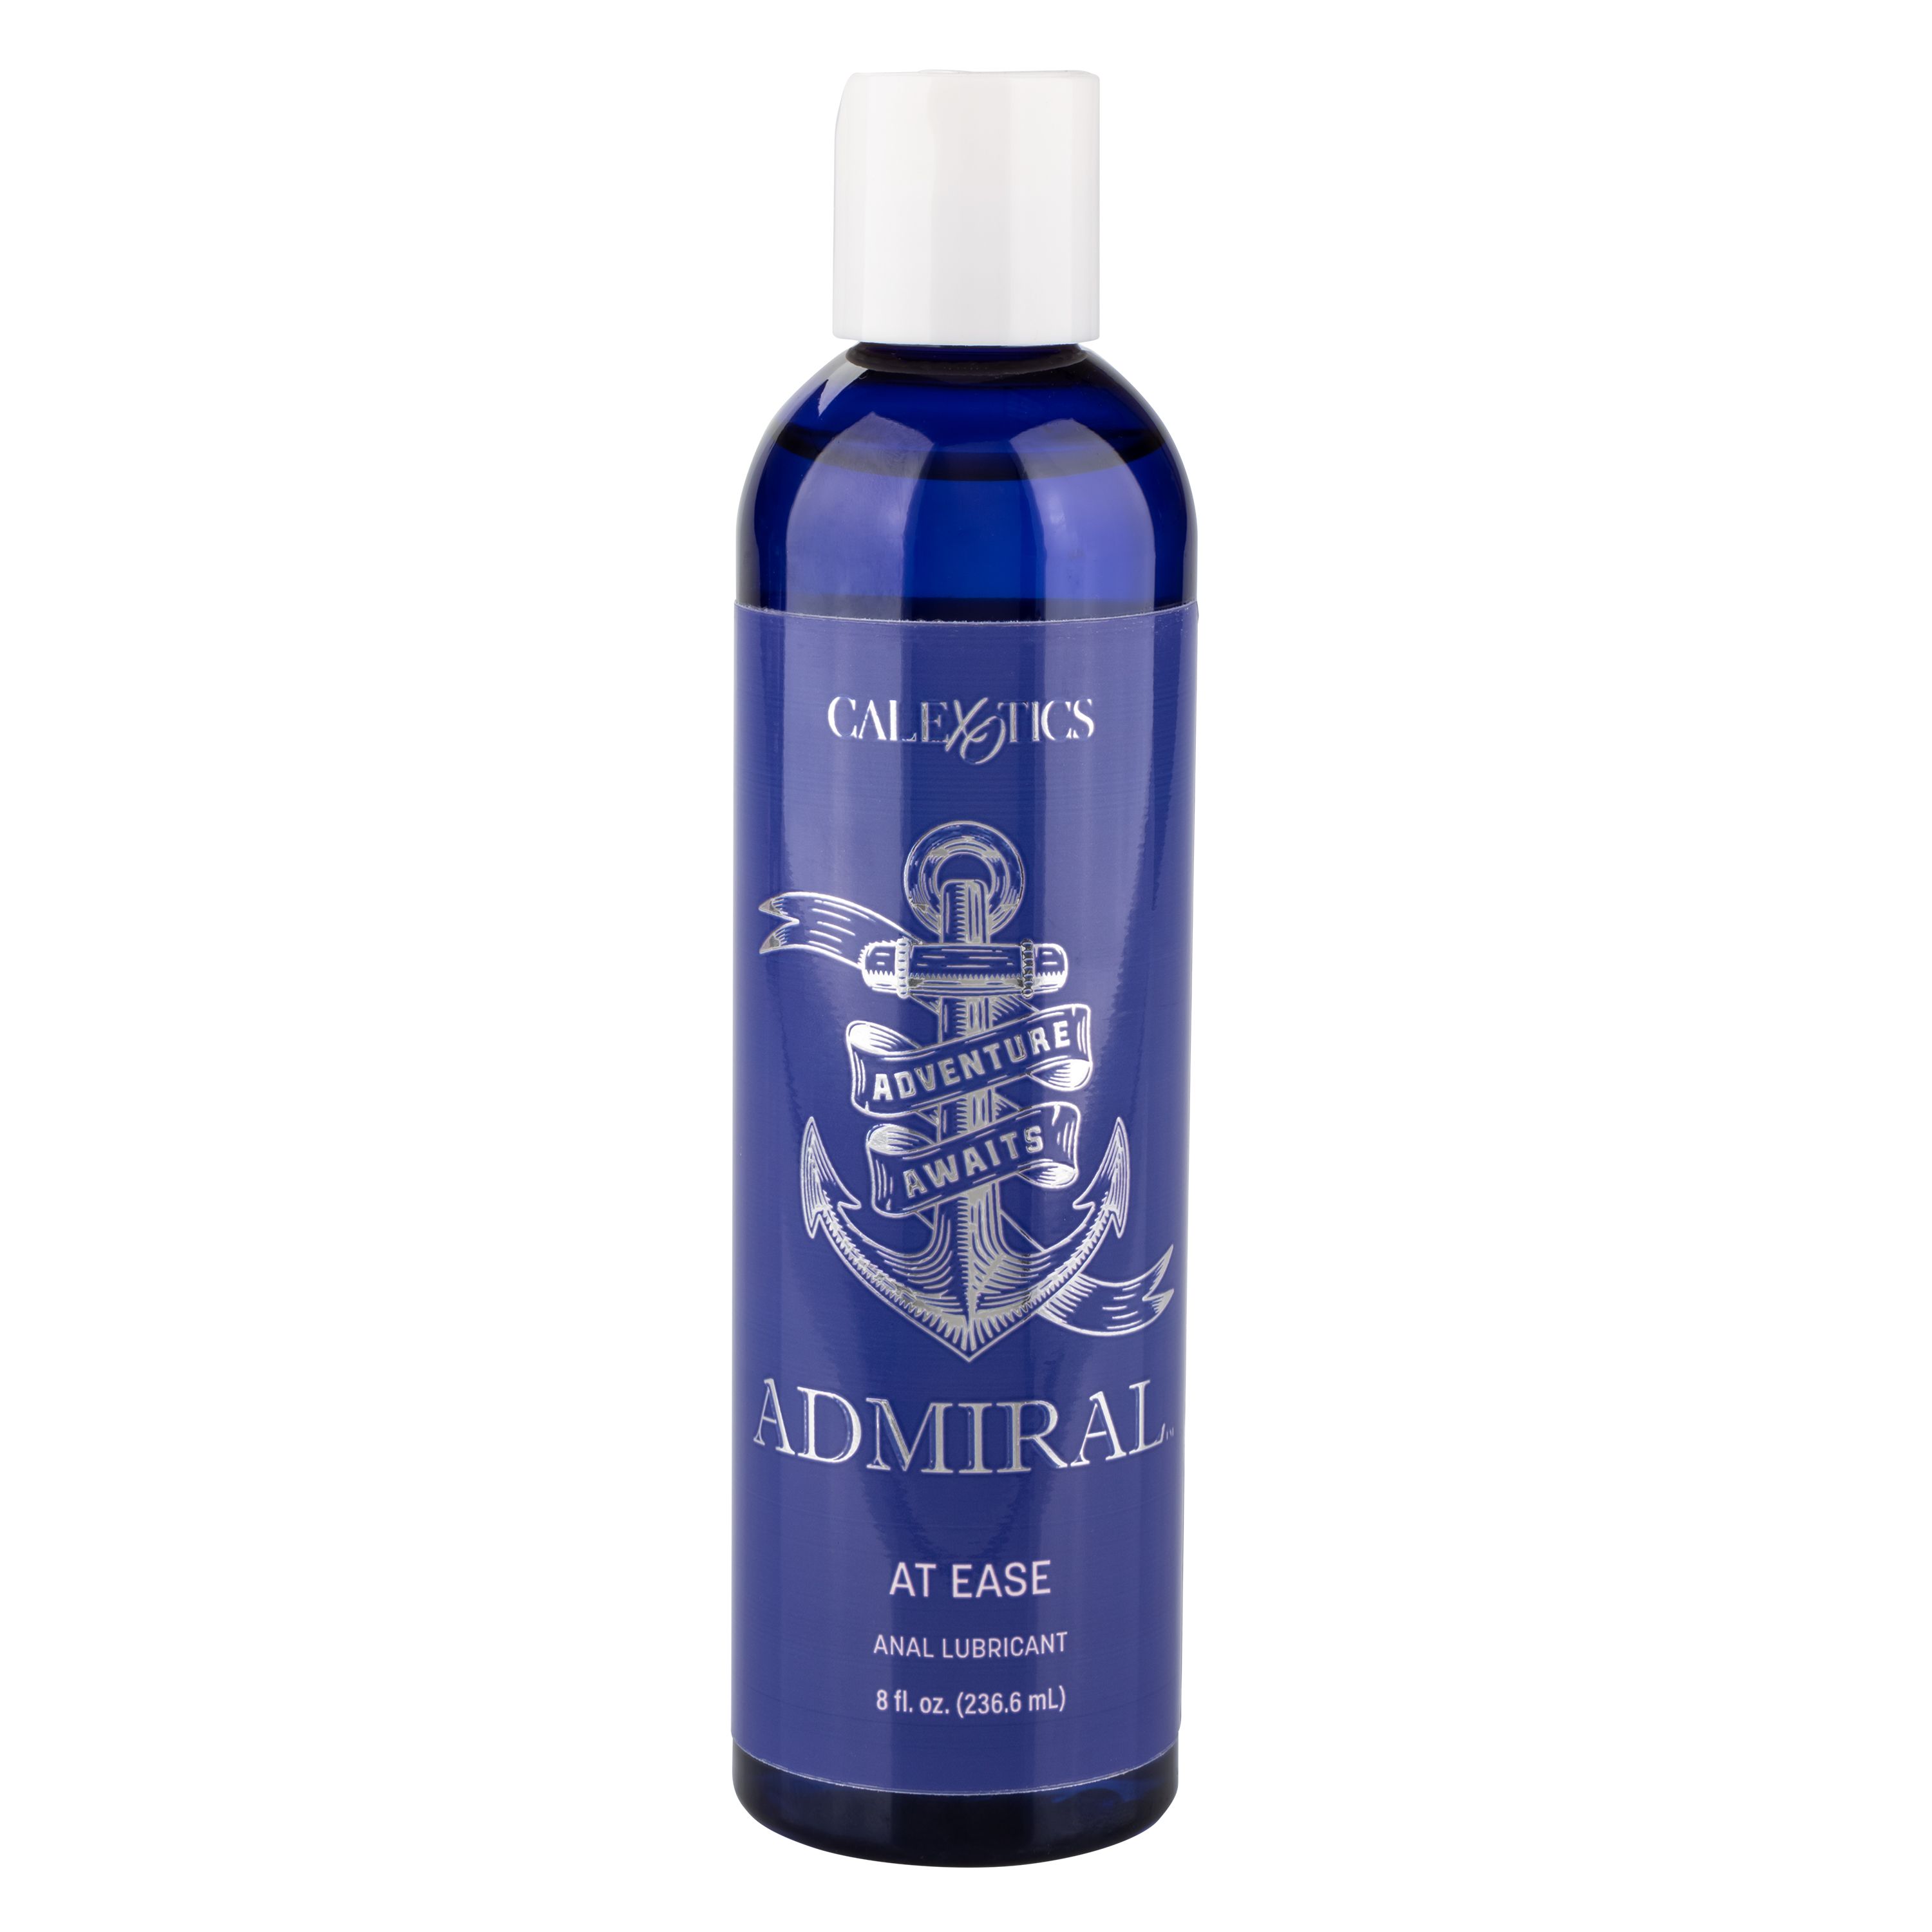 ADMIRAL AT EASE ANAL LUBE 8OZ 